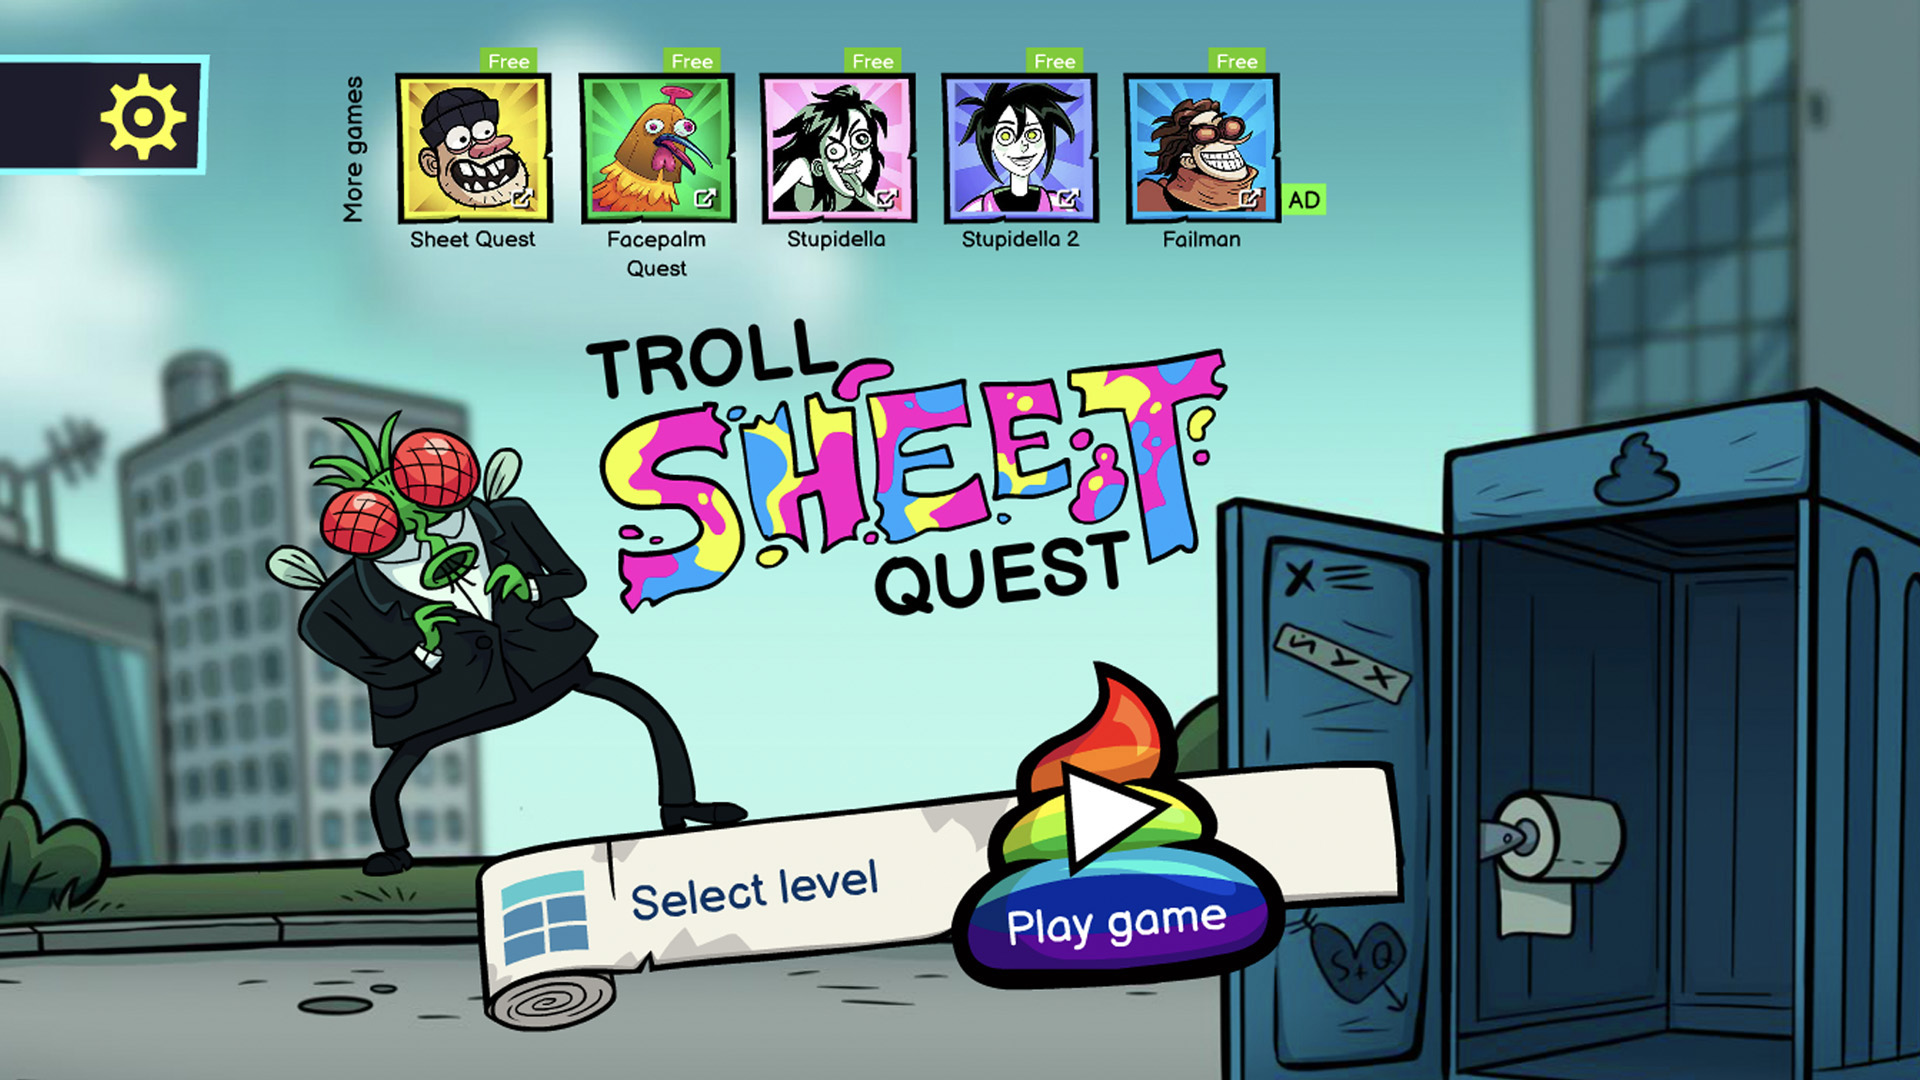 Download Troll Sheet Quest Android free game.